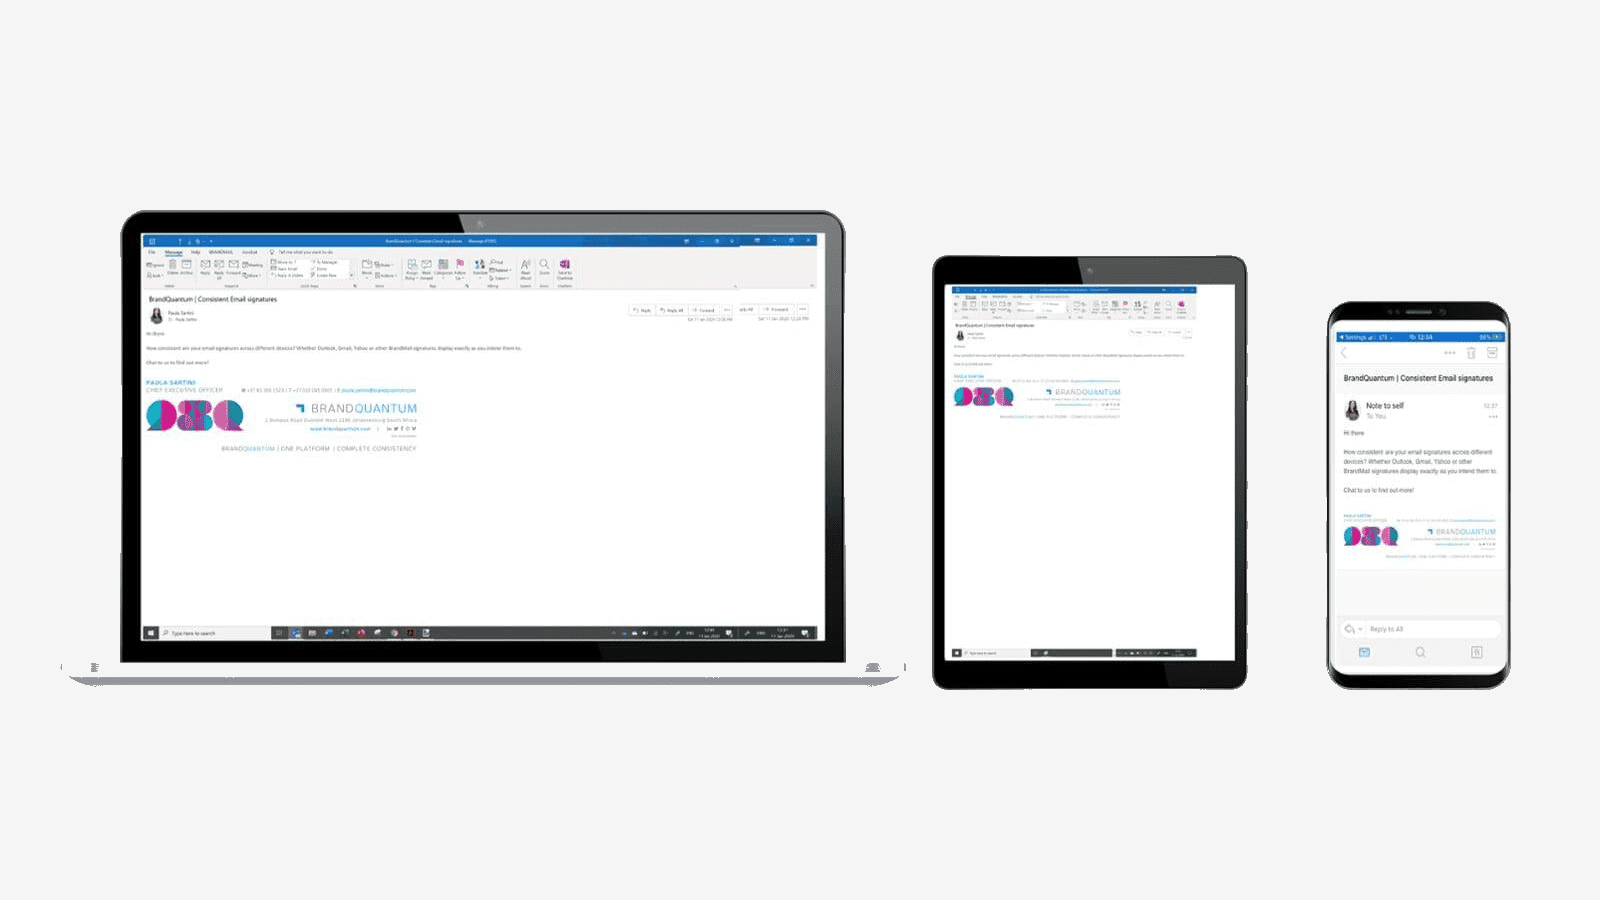 BrandMail consistent email signatures across all devices